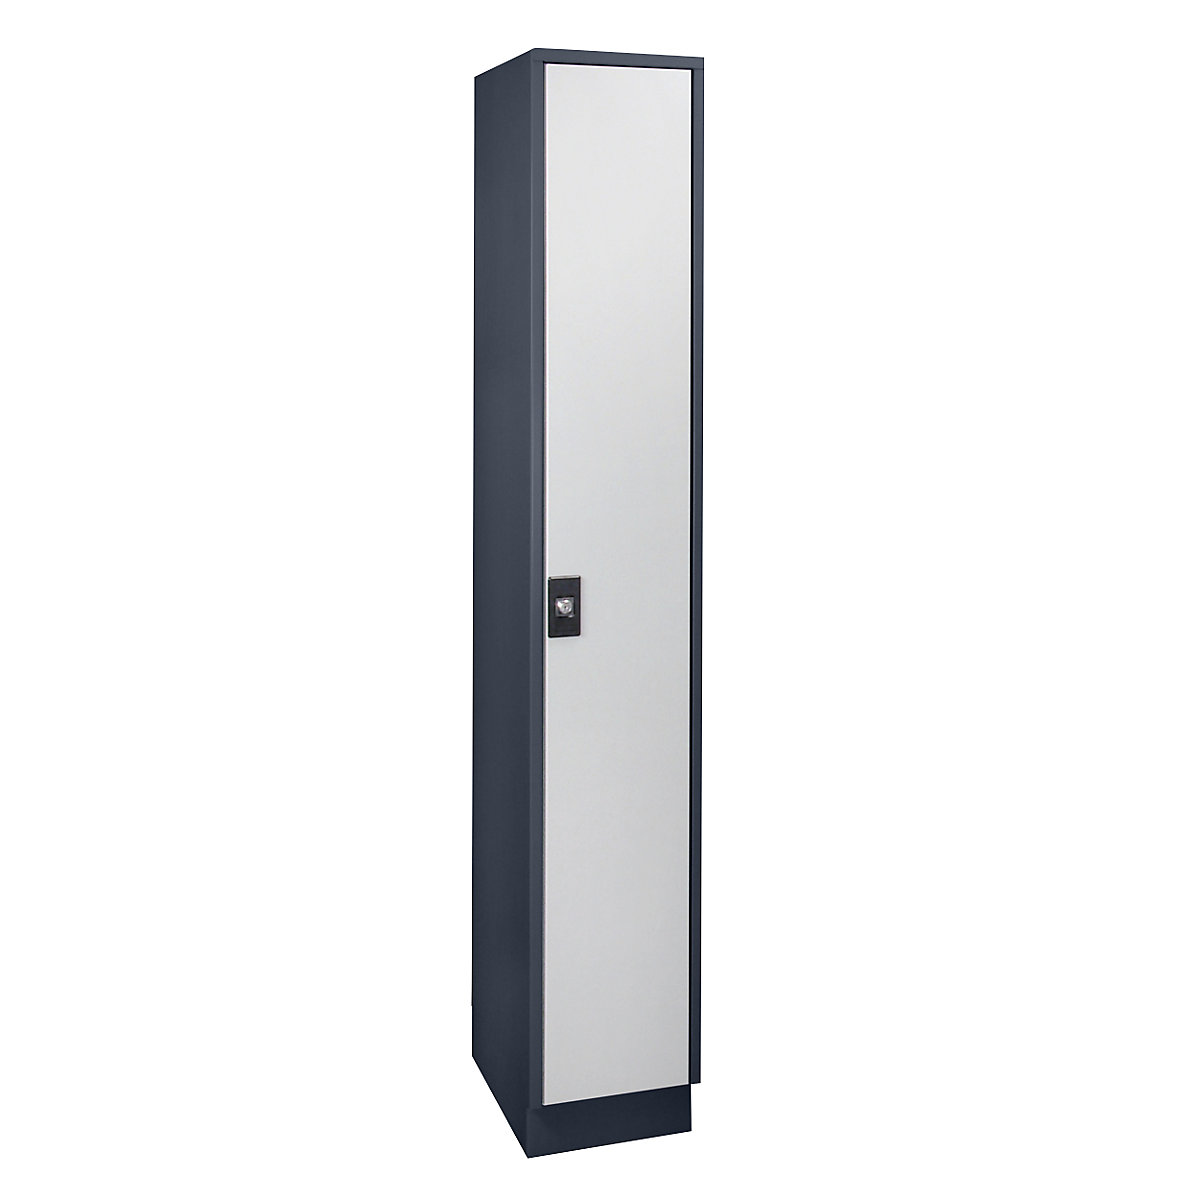 Cloakroom locker – Wolf, 1 x 300 mm wide compartment, charcoal / light grey-8